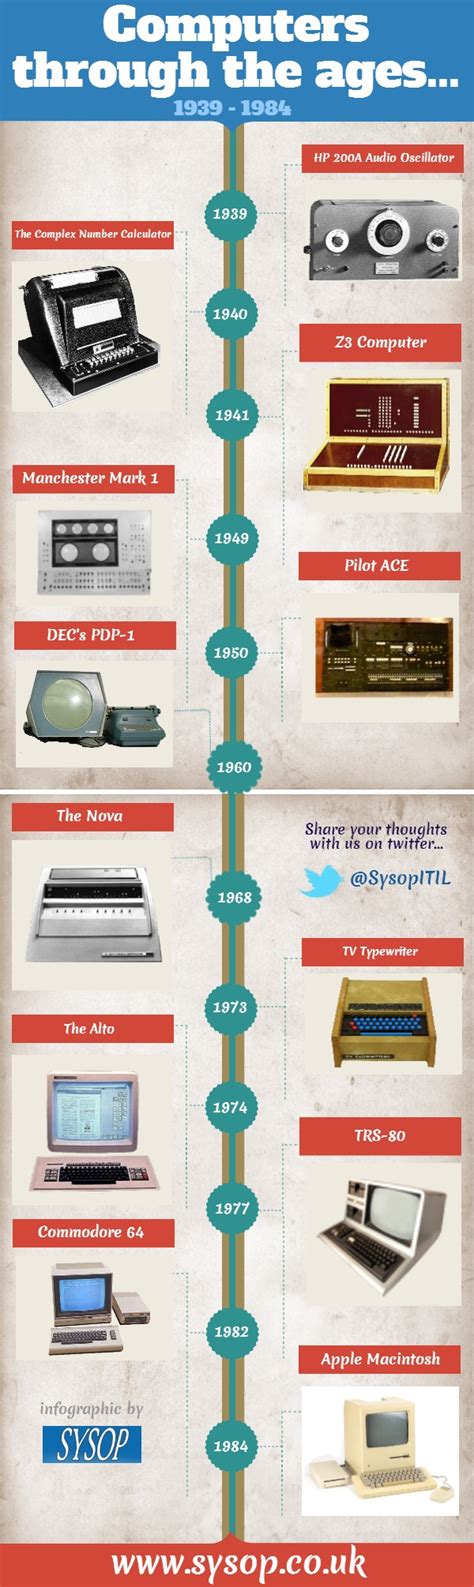 Computers Through The Ages 1939 1984 Infographic Visualistan